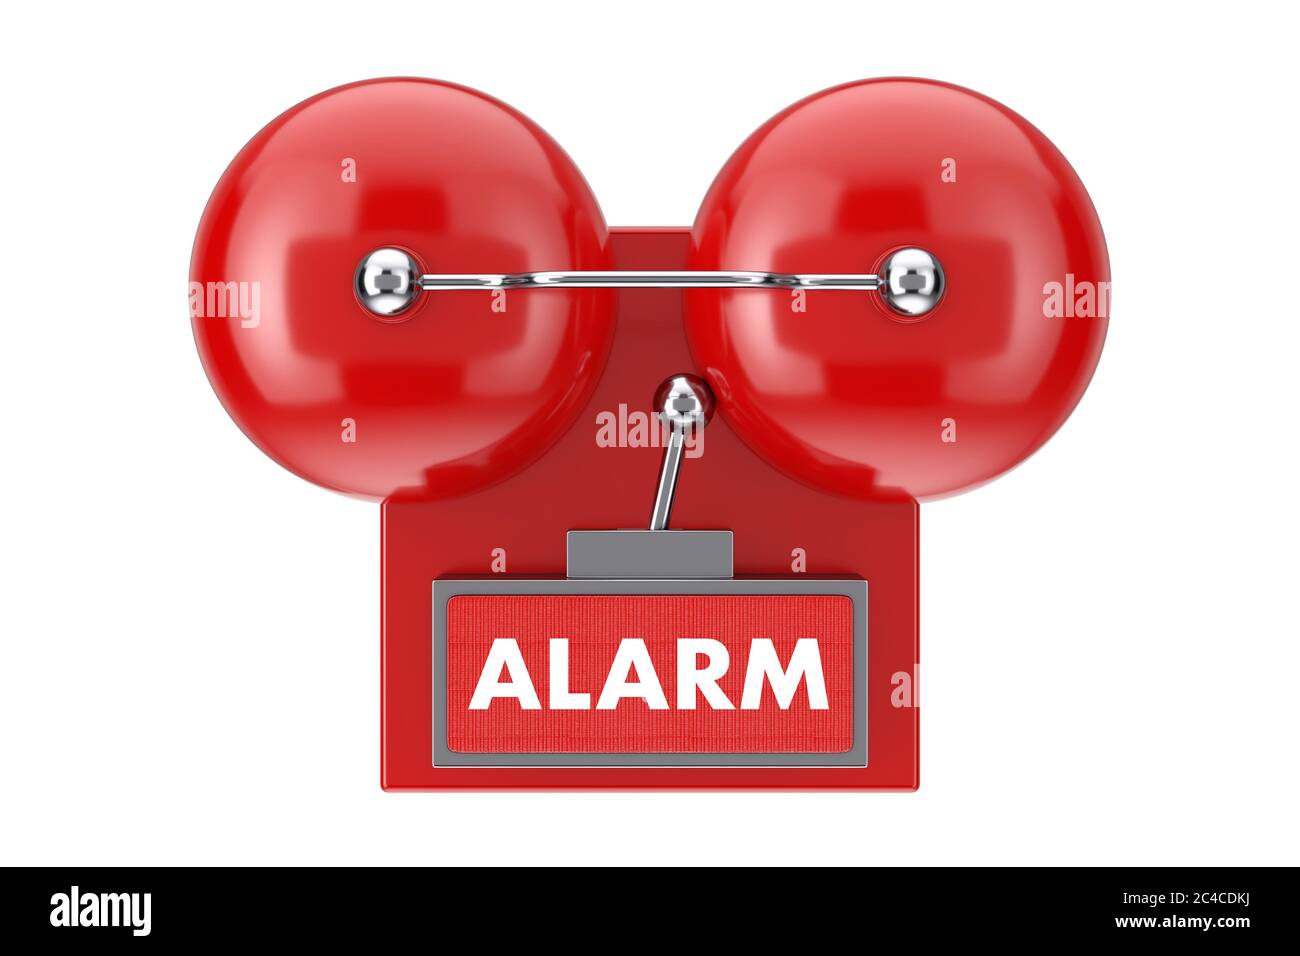 Red Fire Alarm Bell System on a white background. 3d Rendering Stock Photo